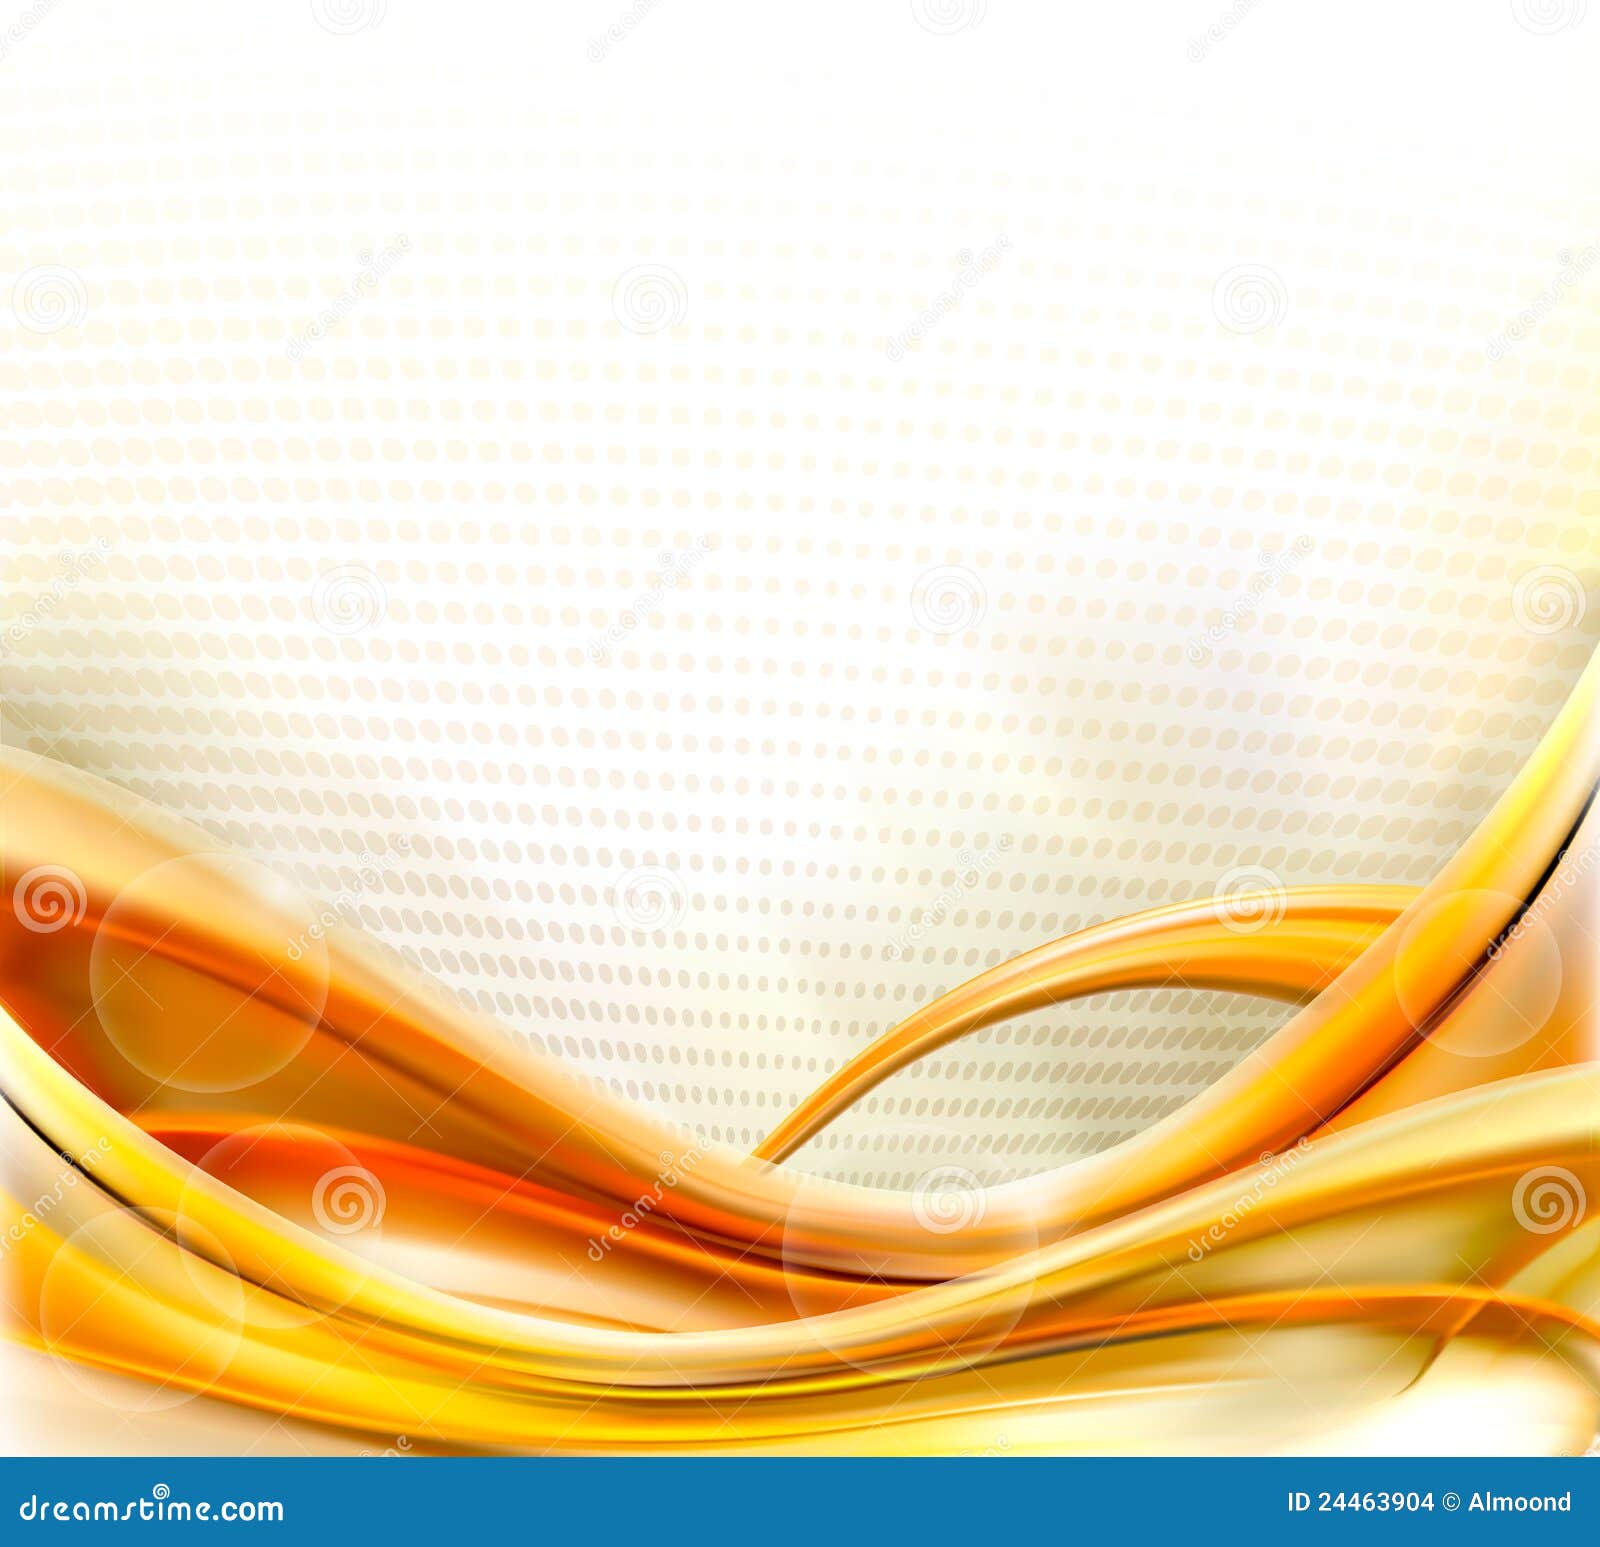 Abstract Elegant Gold Background. Vector Stock Images - Image: 24463904